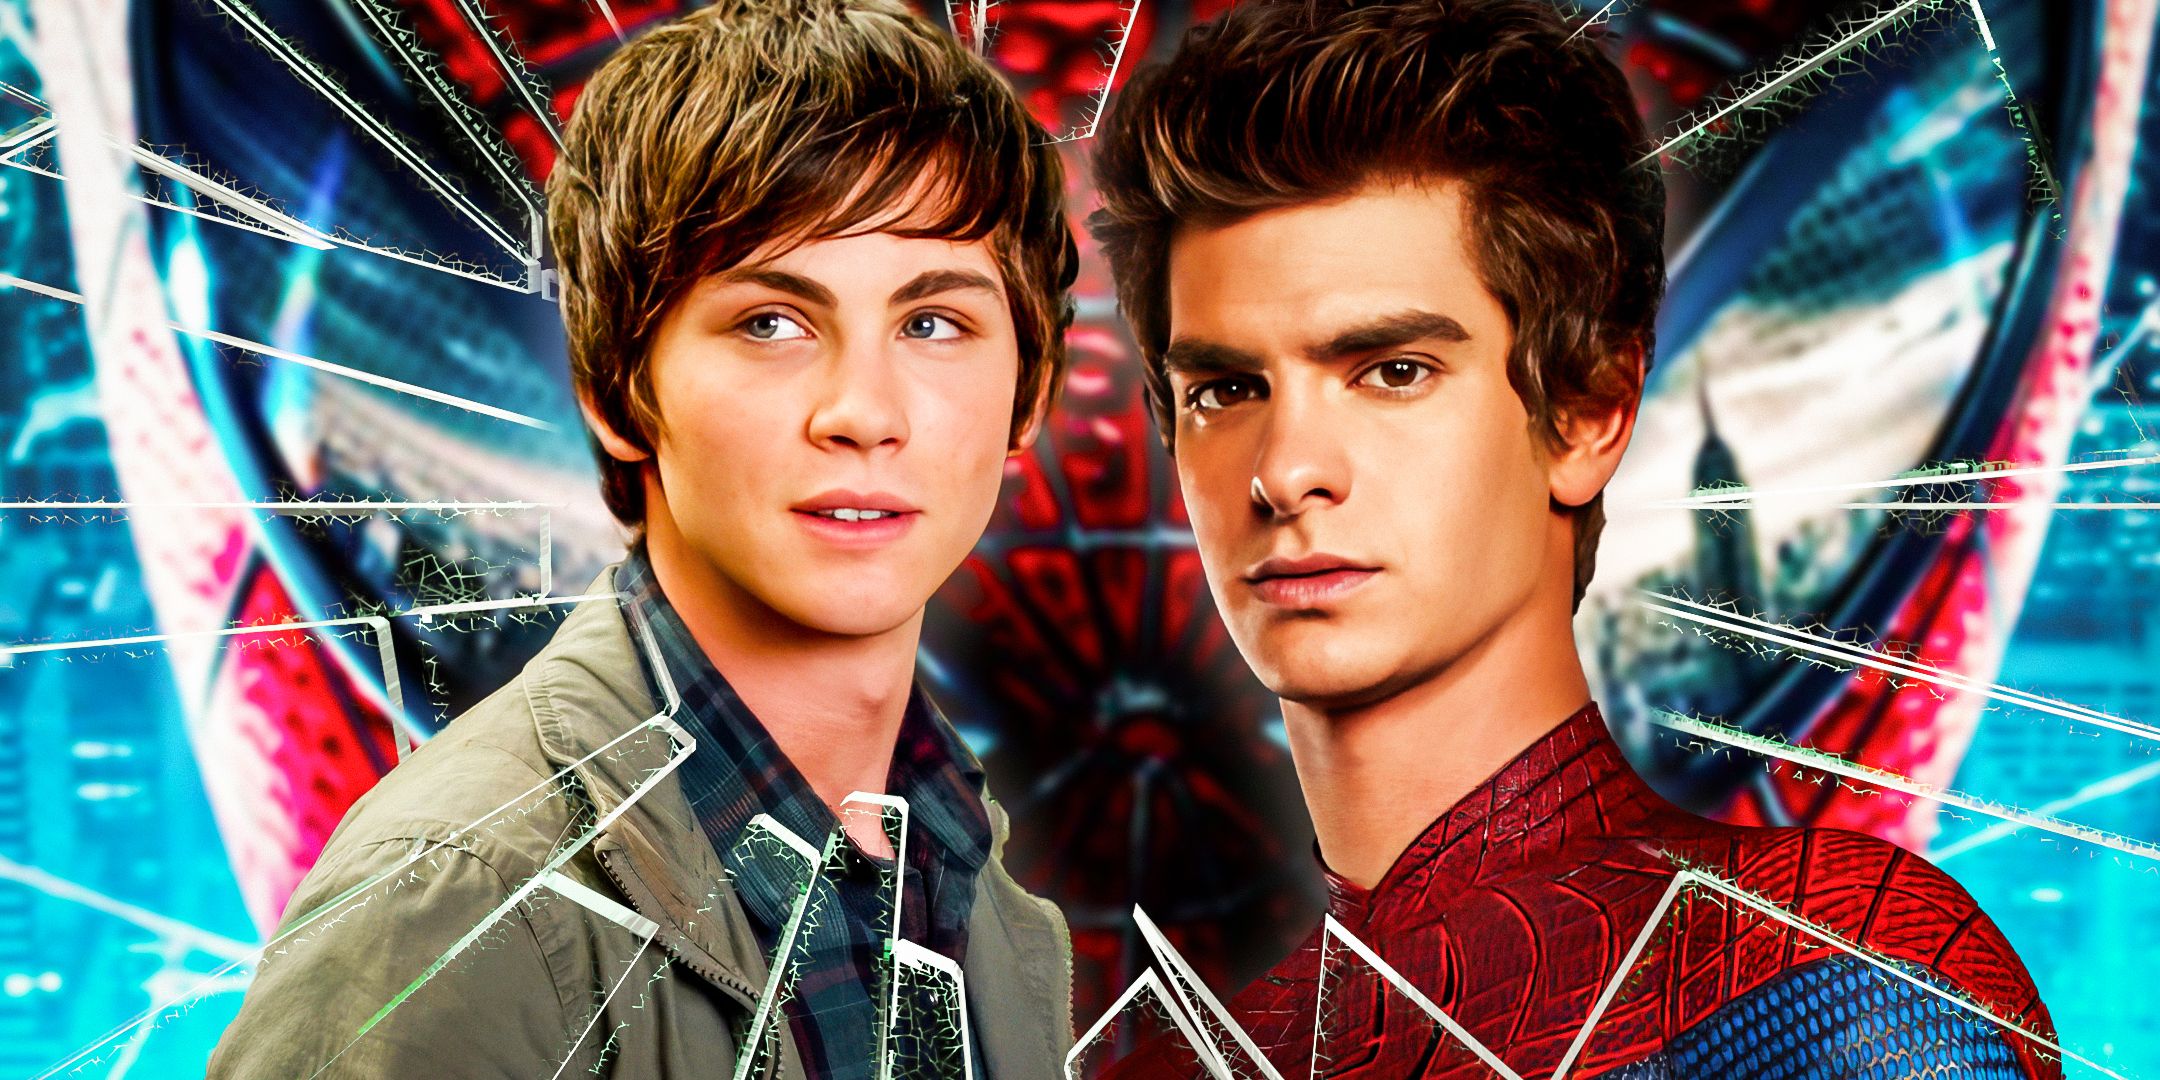 Andrew-Garfield----as-Spider-Man--Peter-Parker-from-The-Amazing-Spider-Man-and-Logan-Lerman-as-Percy-Jackson-from-Percy-Jackson--the-Olympians-The-Lightning-Thief